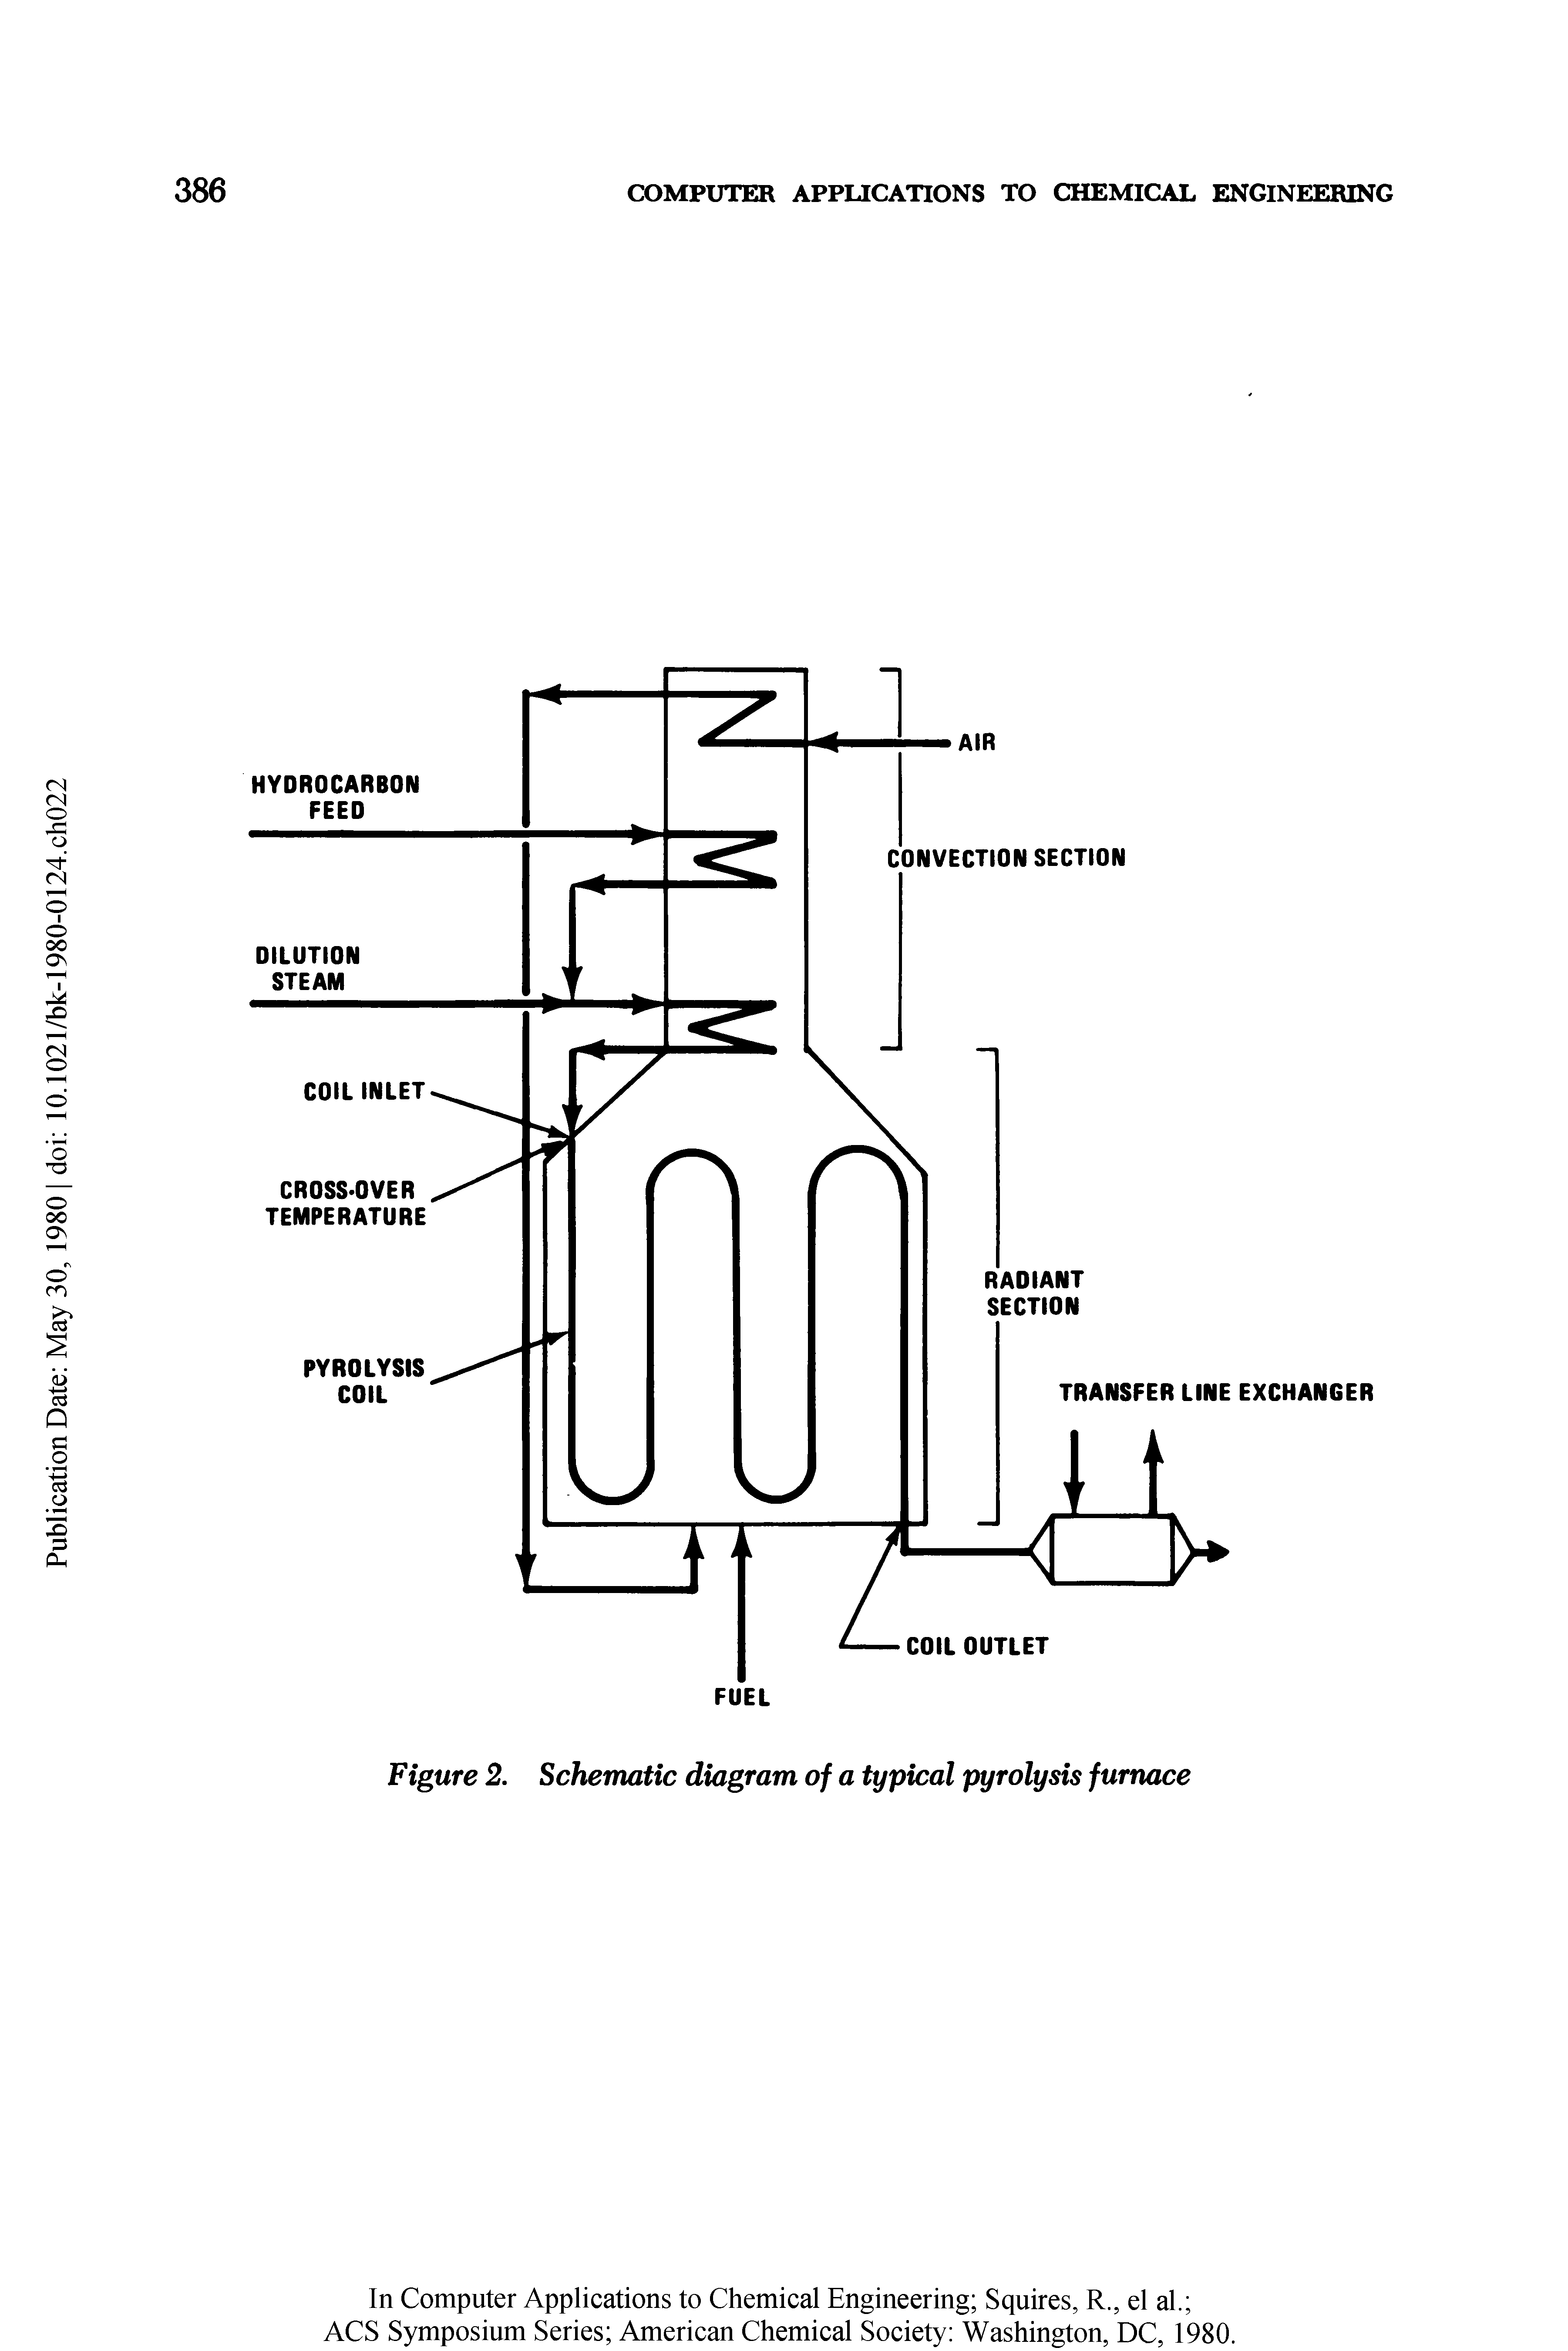 Figure 2. Schematic diagram of a typical pyrolysis furnace...